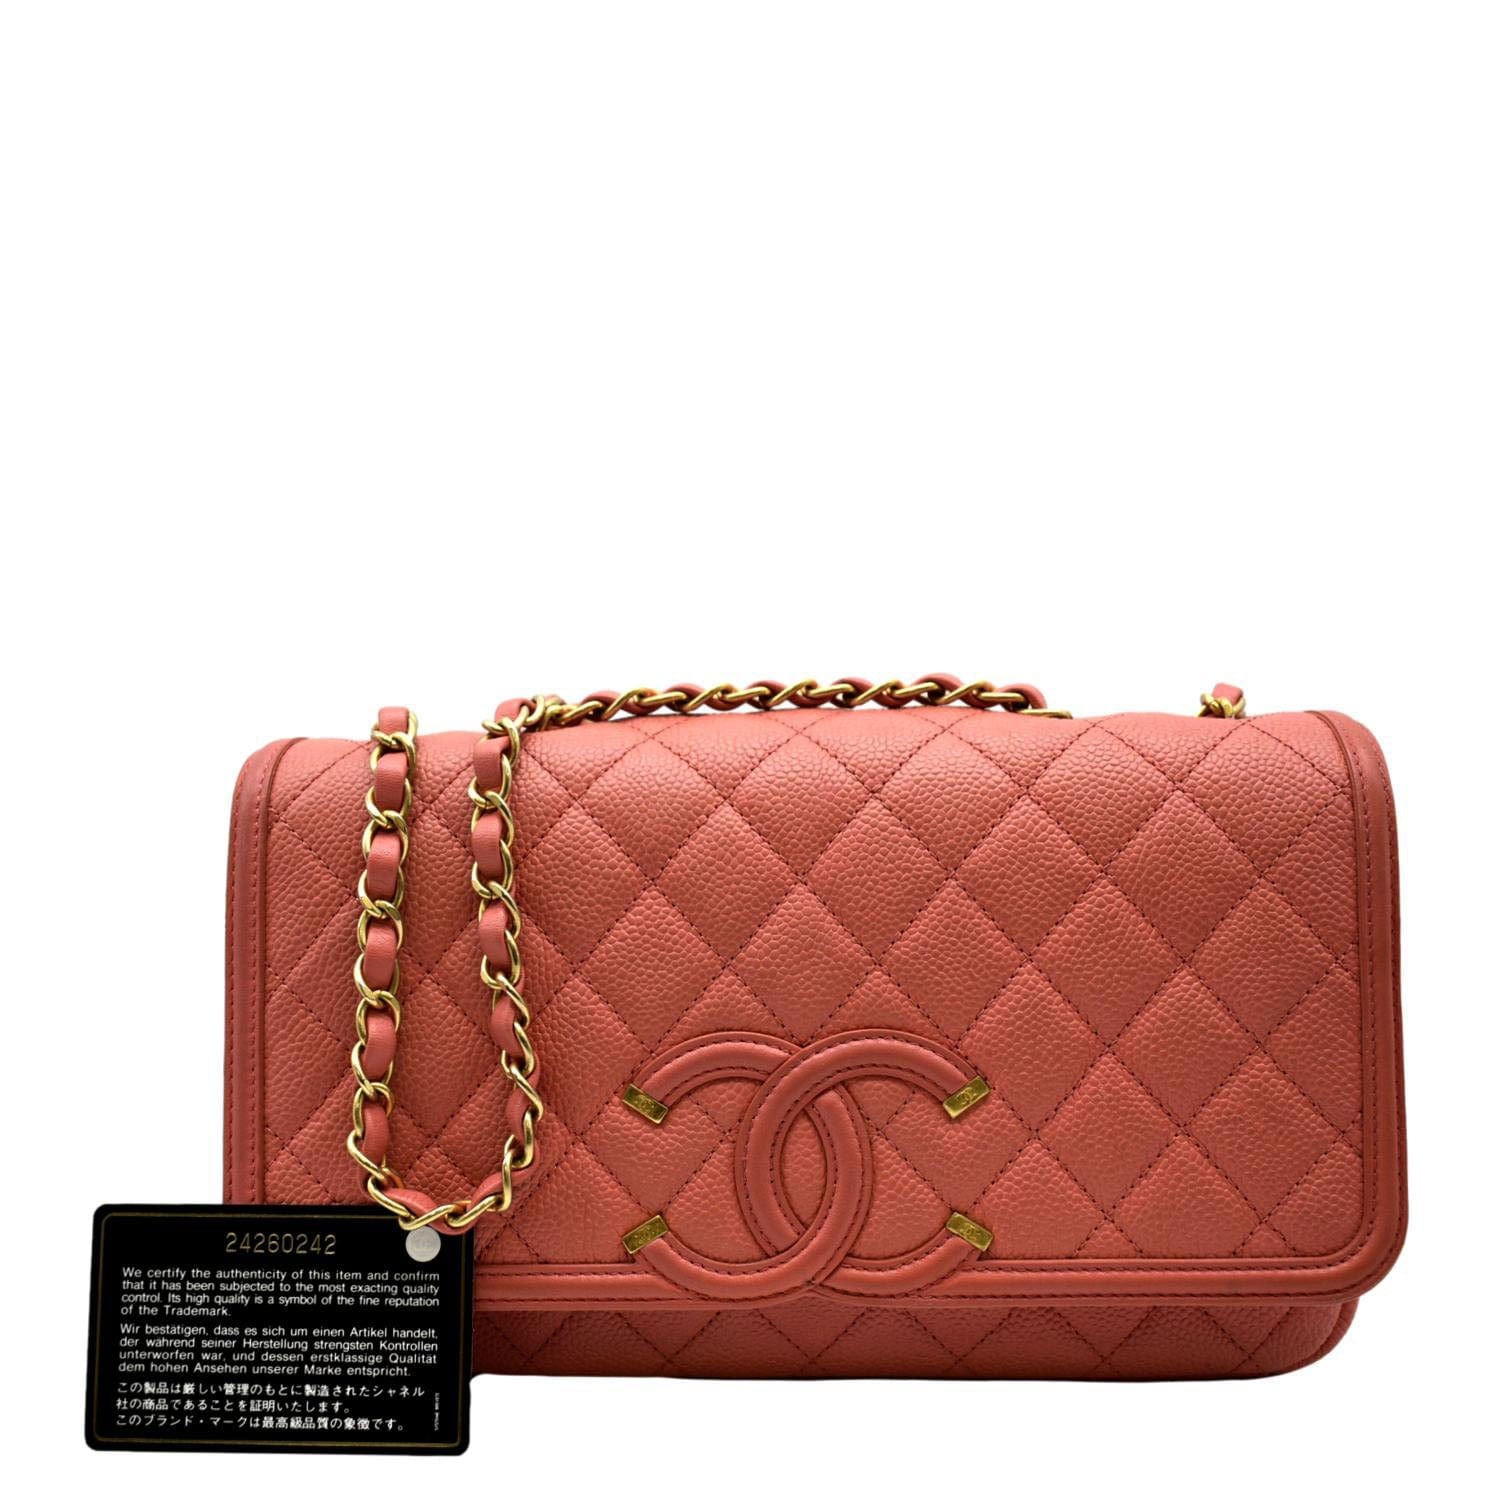 CHANEL, Bags, New Authentic Chanel Filigree Caviar Card Wallet